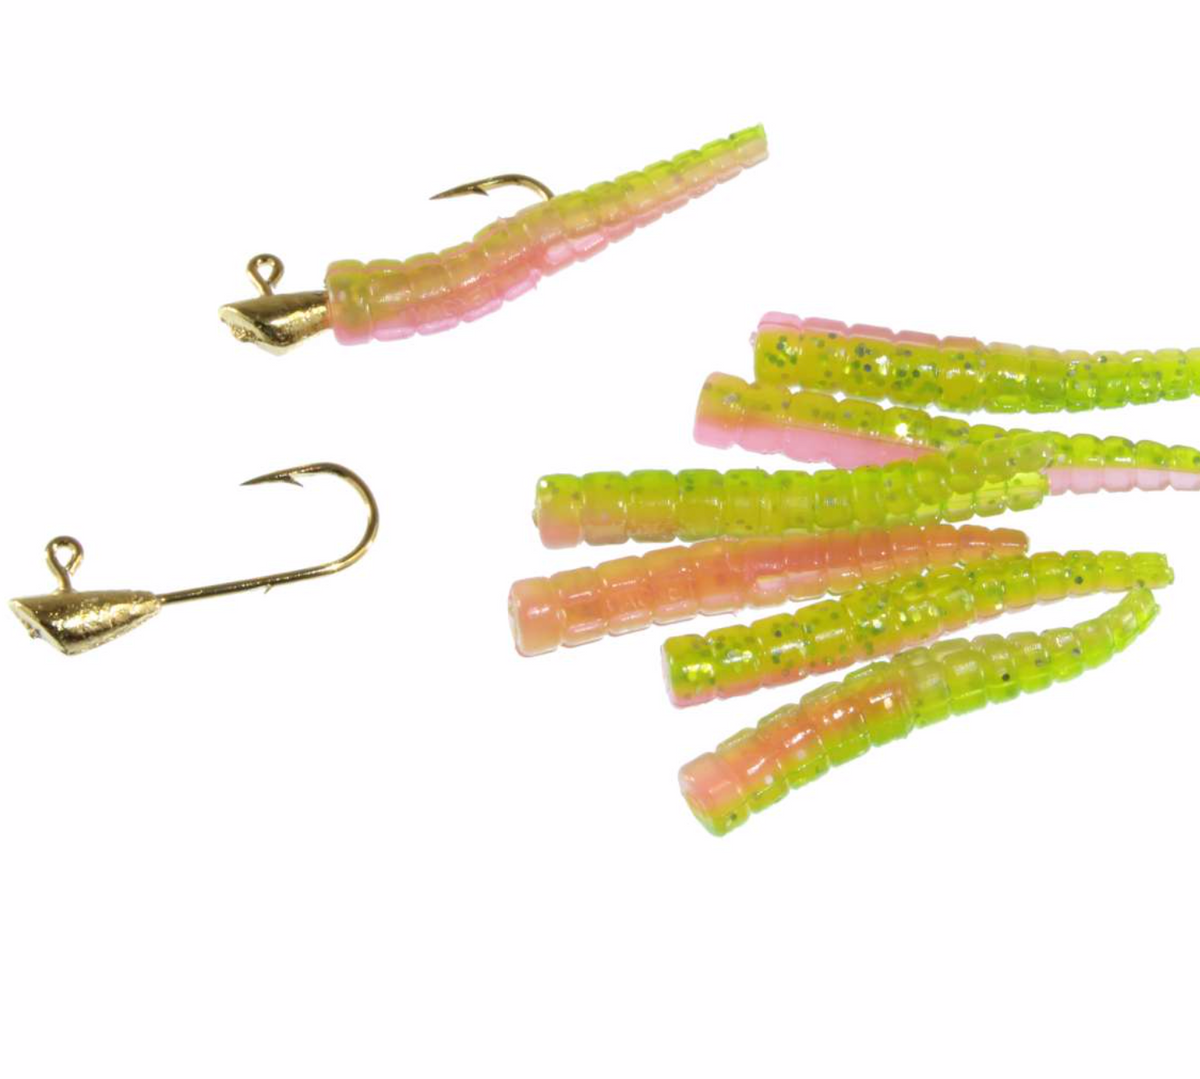 Leland Lures Trout Magnet 9pc Packs – Tackle World